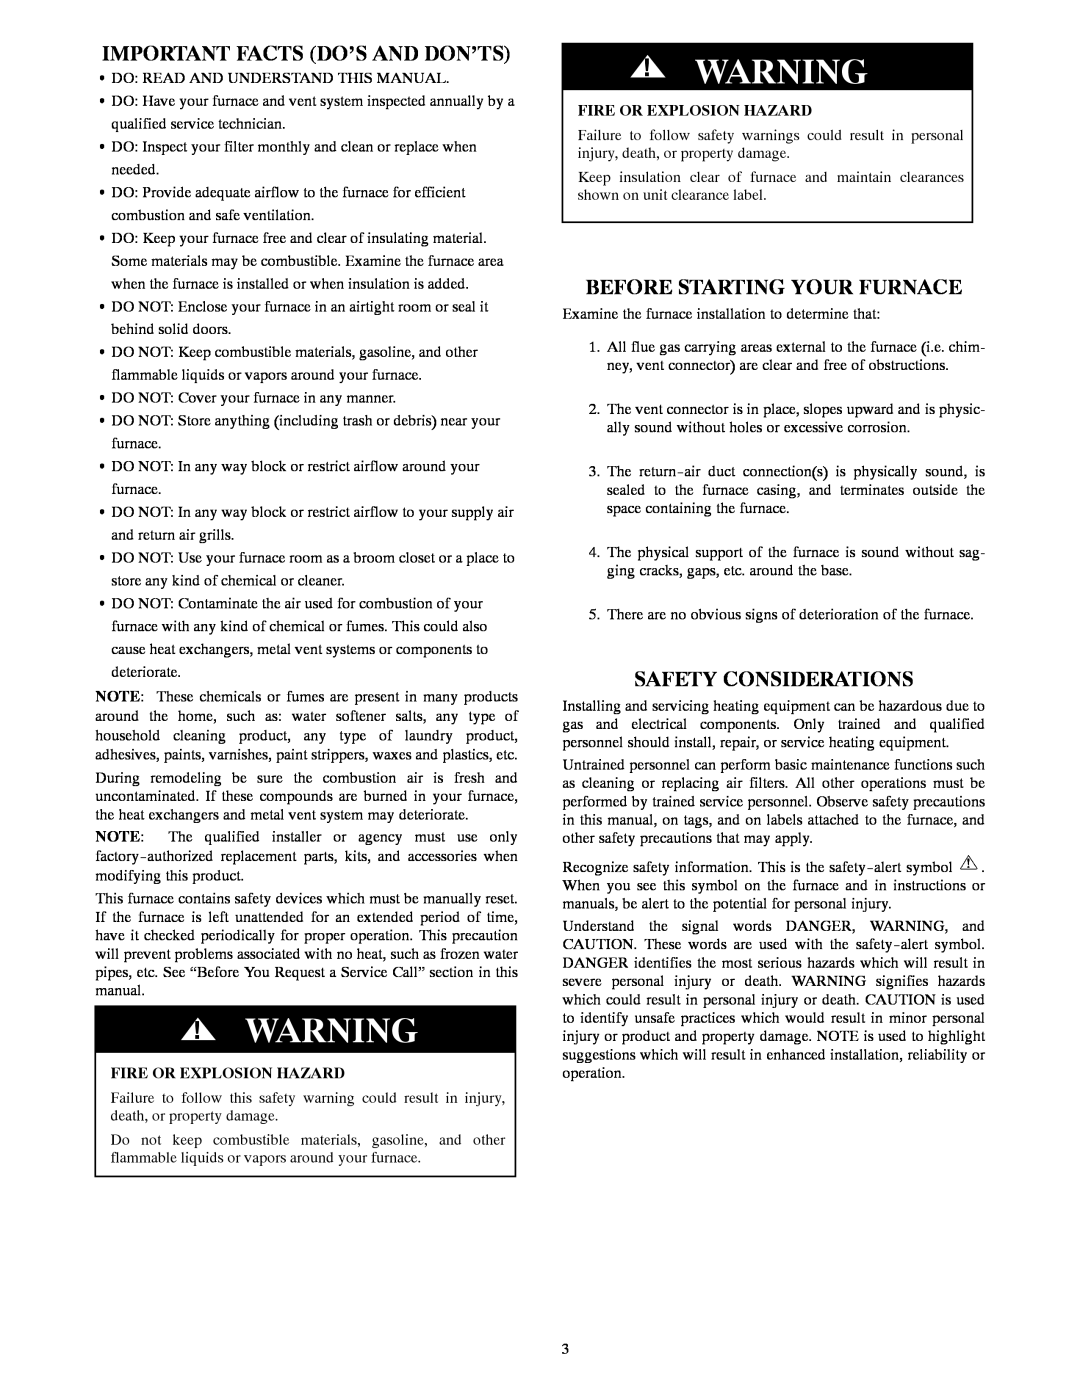 Bryant A10252 owner manual Important Facts Do’S And Don’Ts, Before Starting Your Furnace, Safety Considerations 